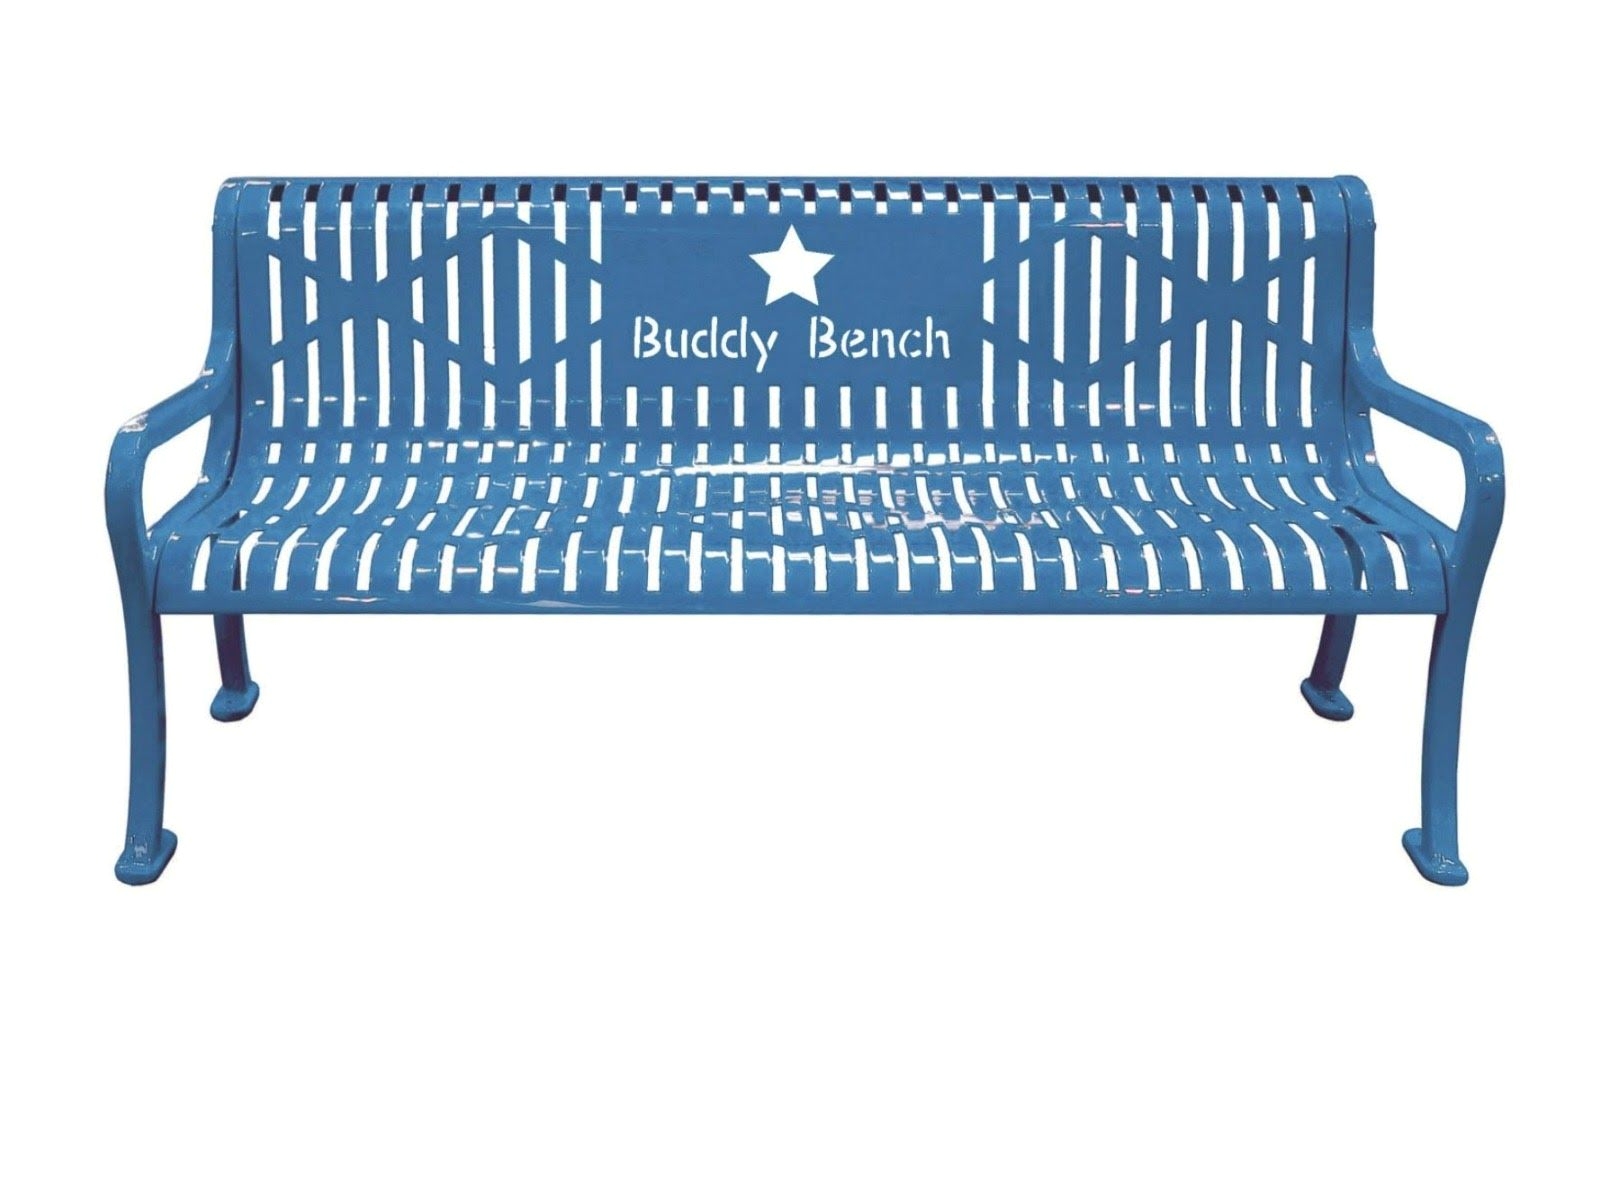 Buddy Bench for Sale Buddy Bench order Your Custom Buddy Bench or Friendship Seat at